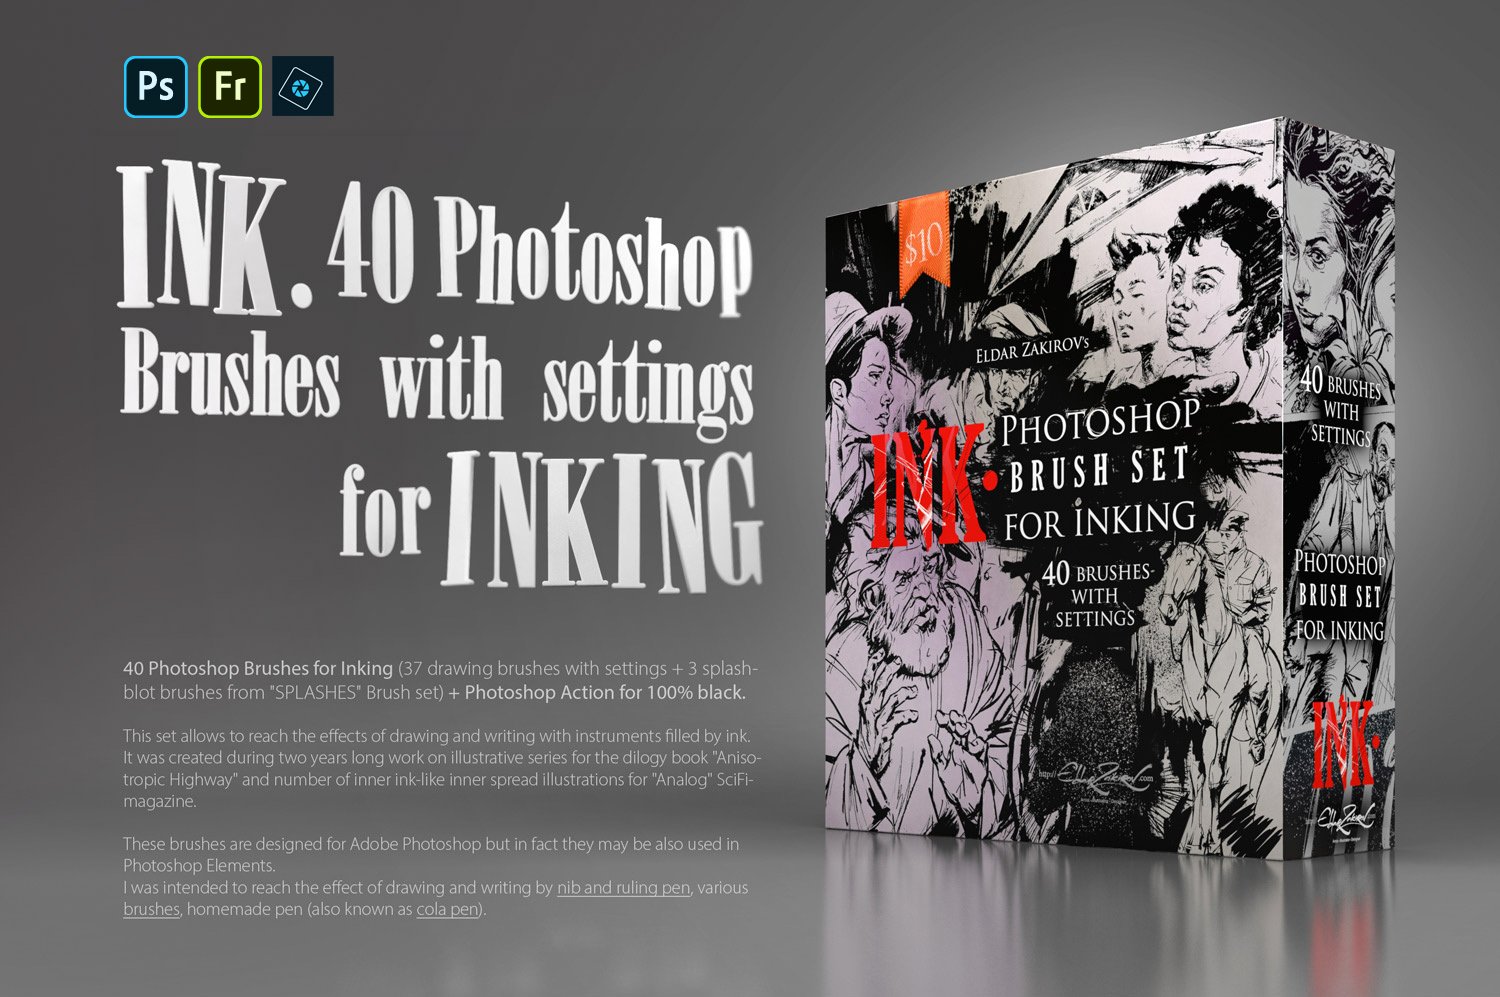 INK. 40 Photoshop Brushes for Inkingpreview image.